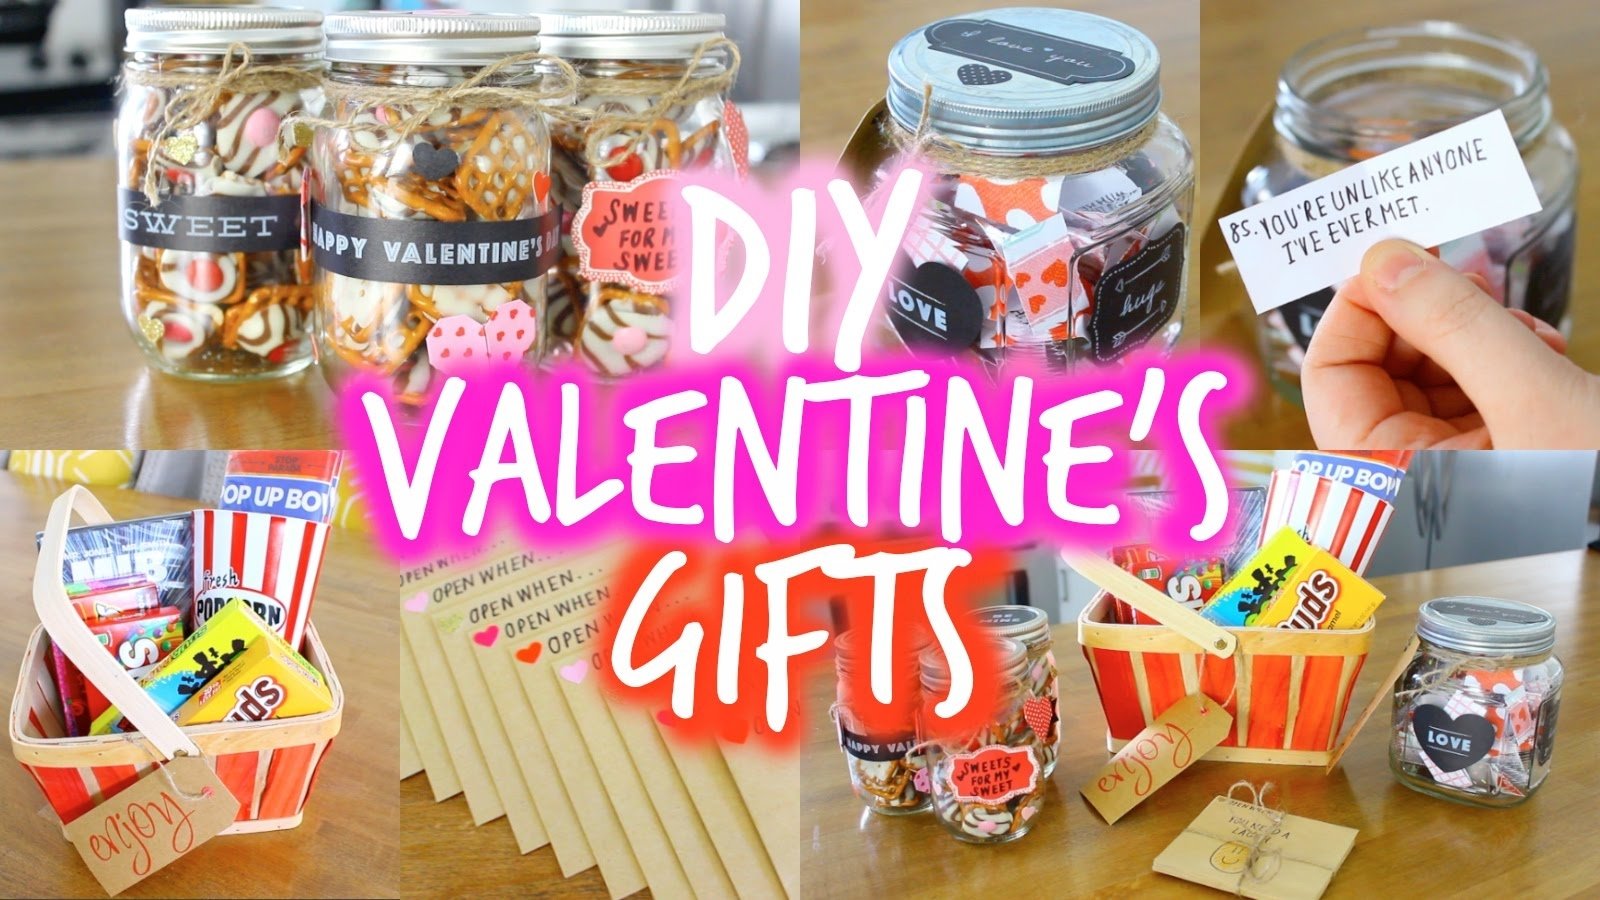 10 Wonderful Ideas For Valentines For Him easy diy valentines day gift ideas for your boyfriend youtube 72 2022